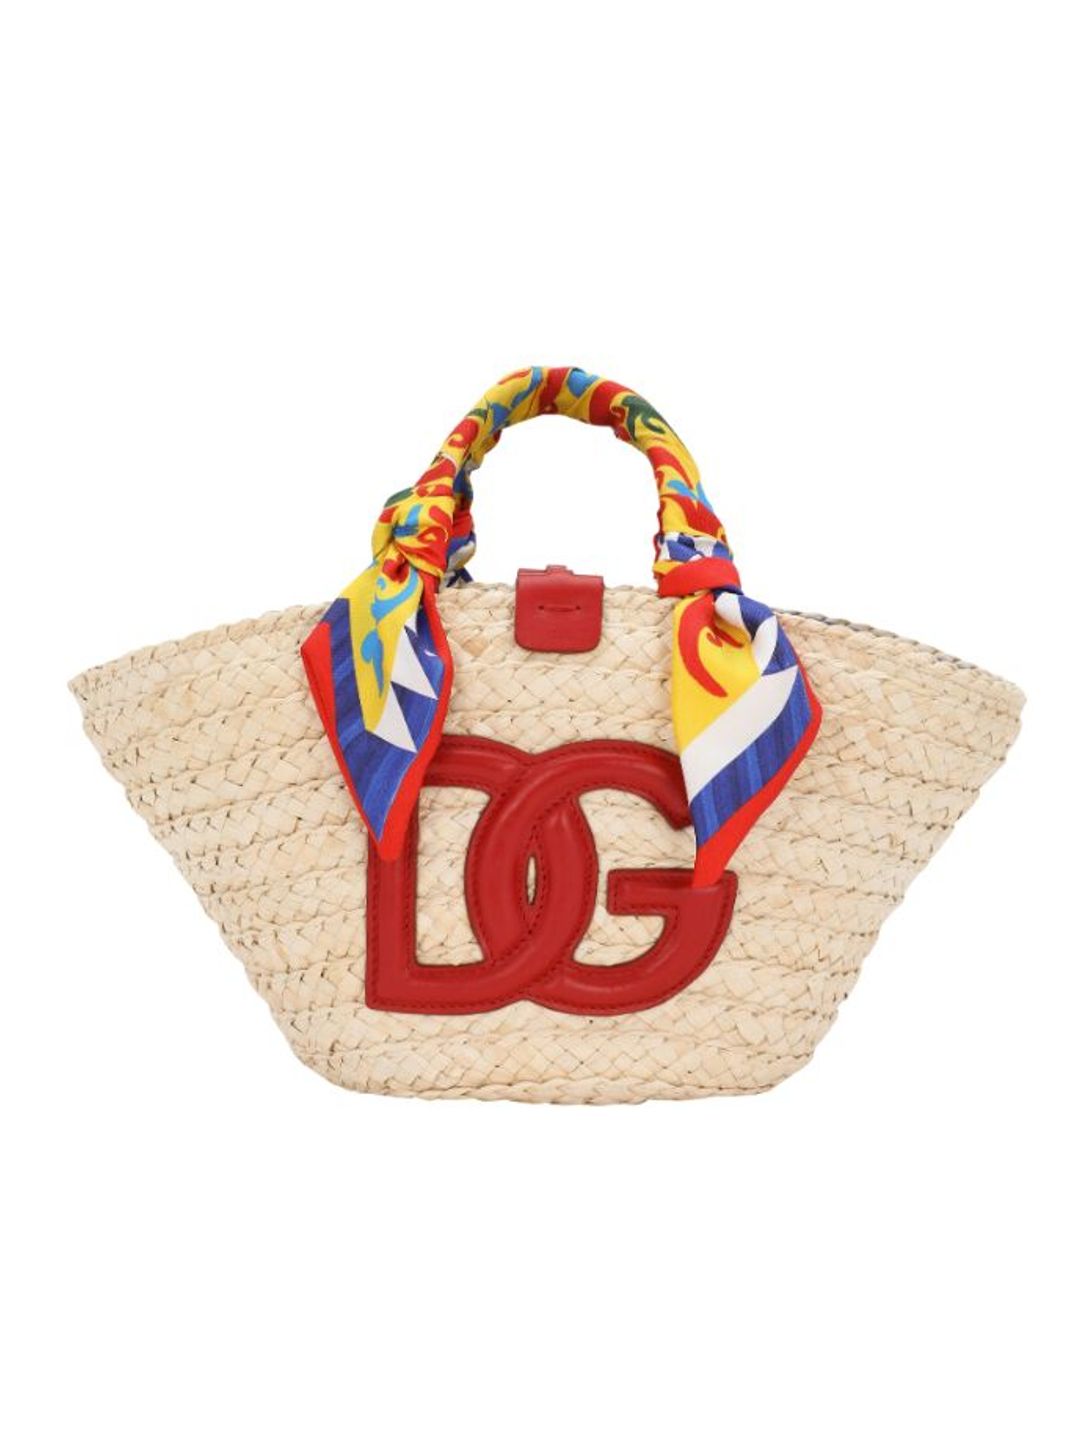 Dolce & Gabbana beach bag with scarf tied around the handles 